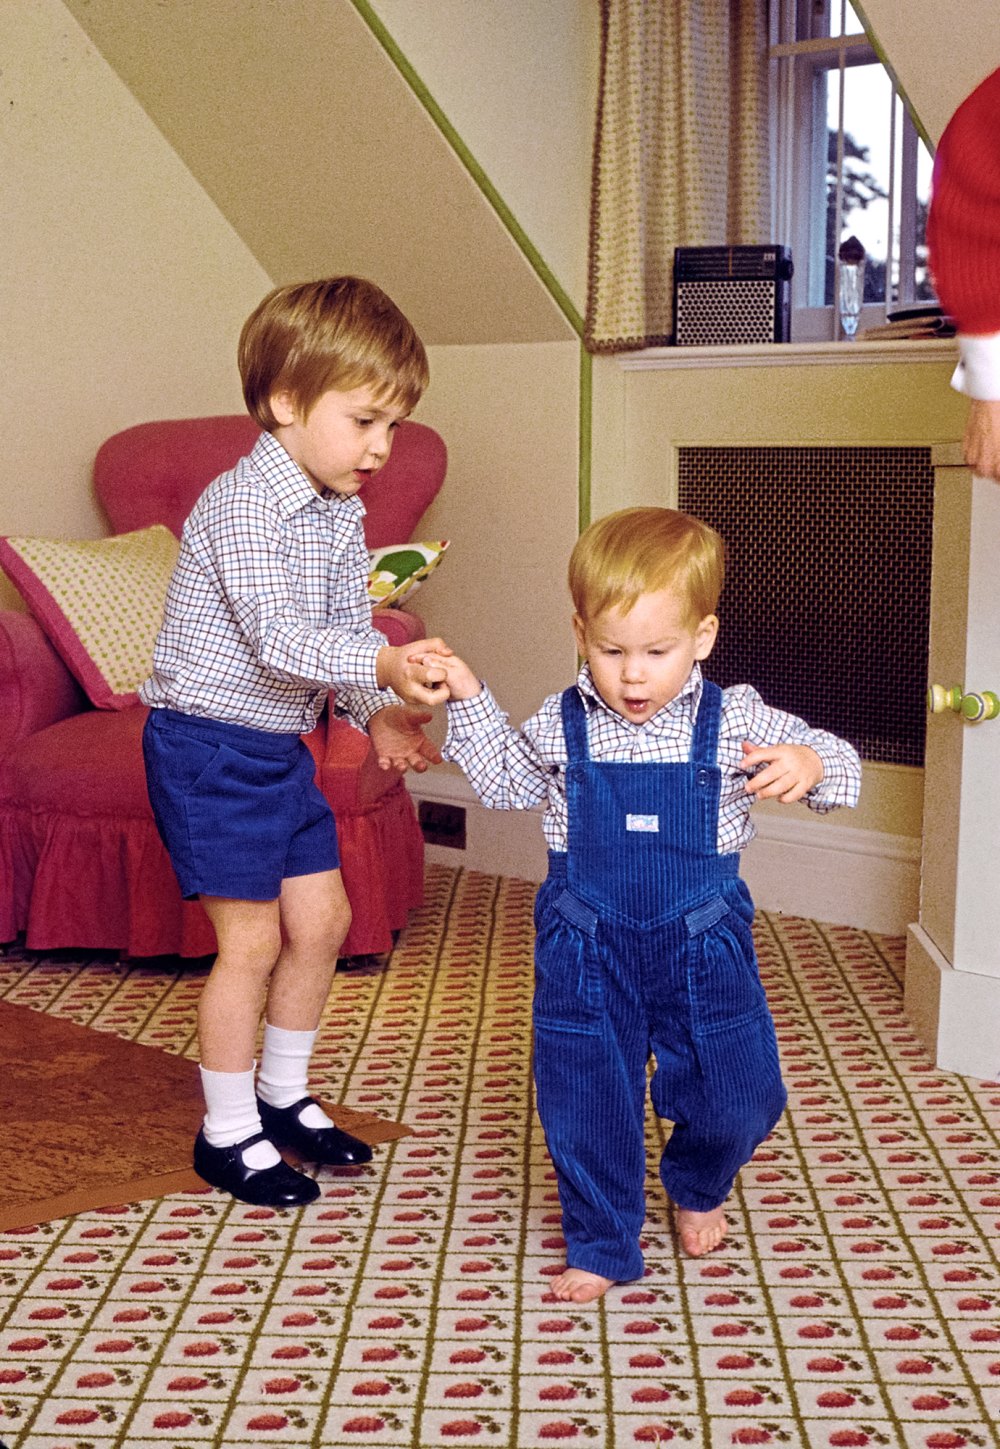 Prince William and Prince Harry Us Weekly 2409 Overalls